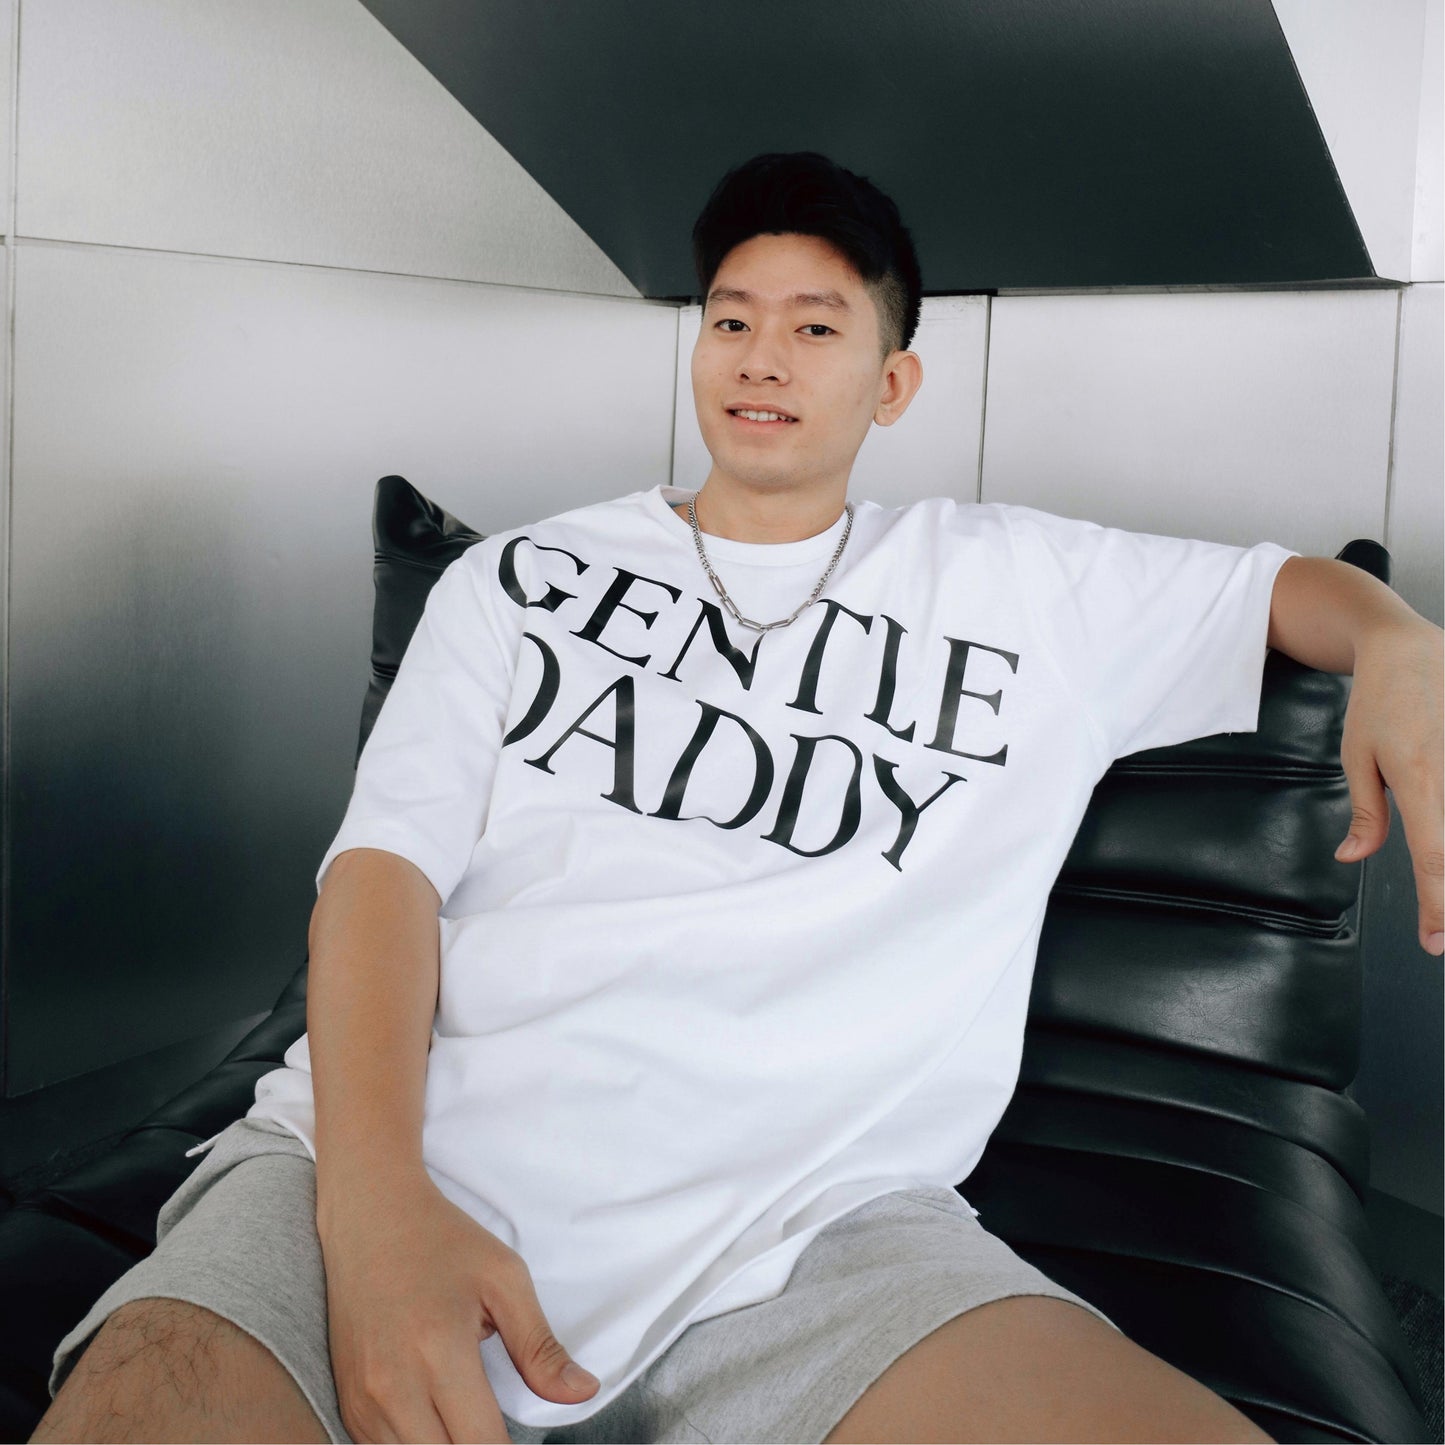 T Shirt Gentle Daddy (Casual Chic)